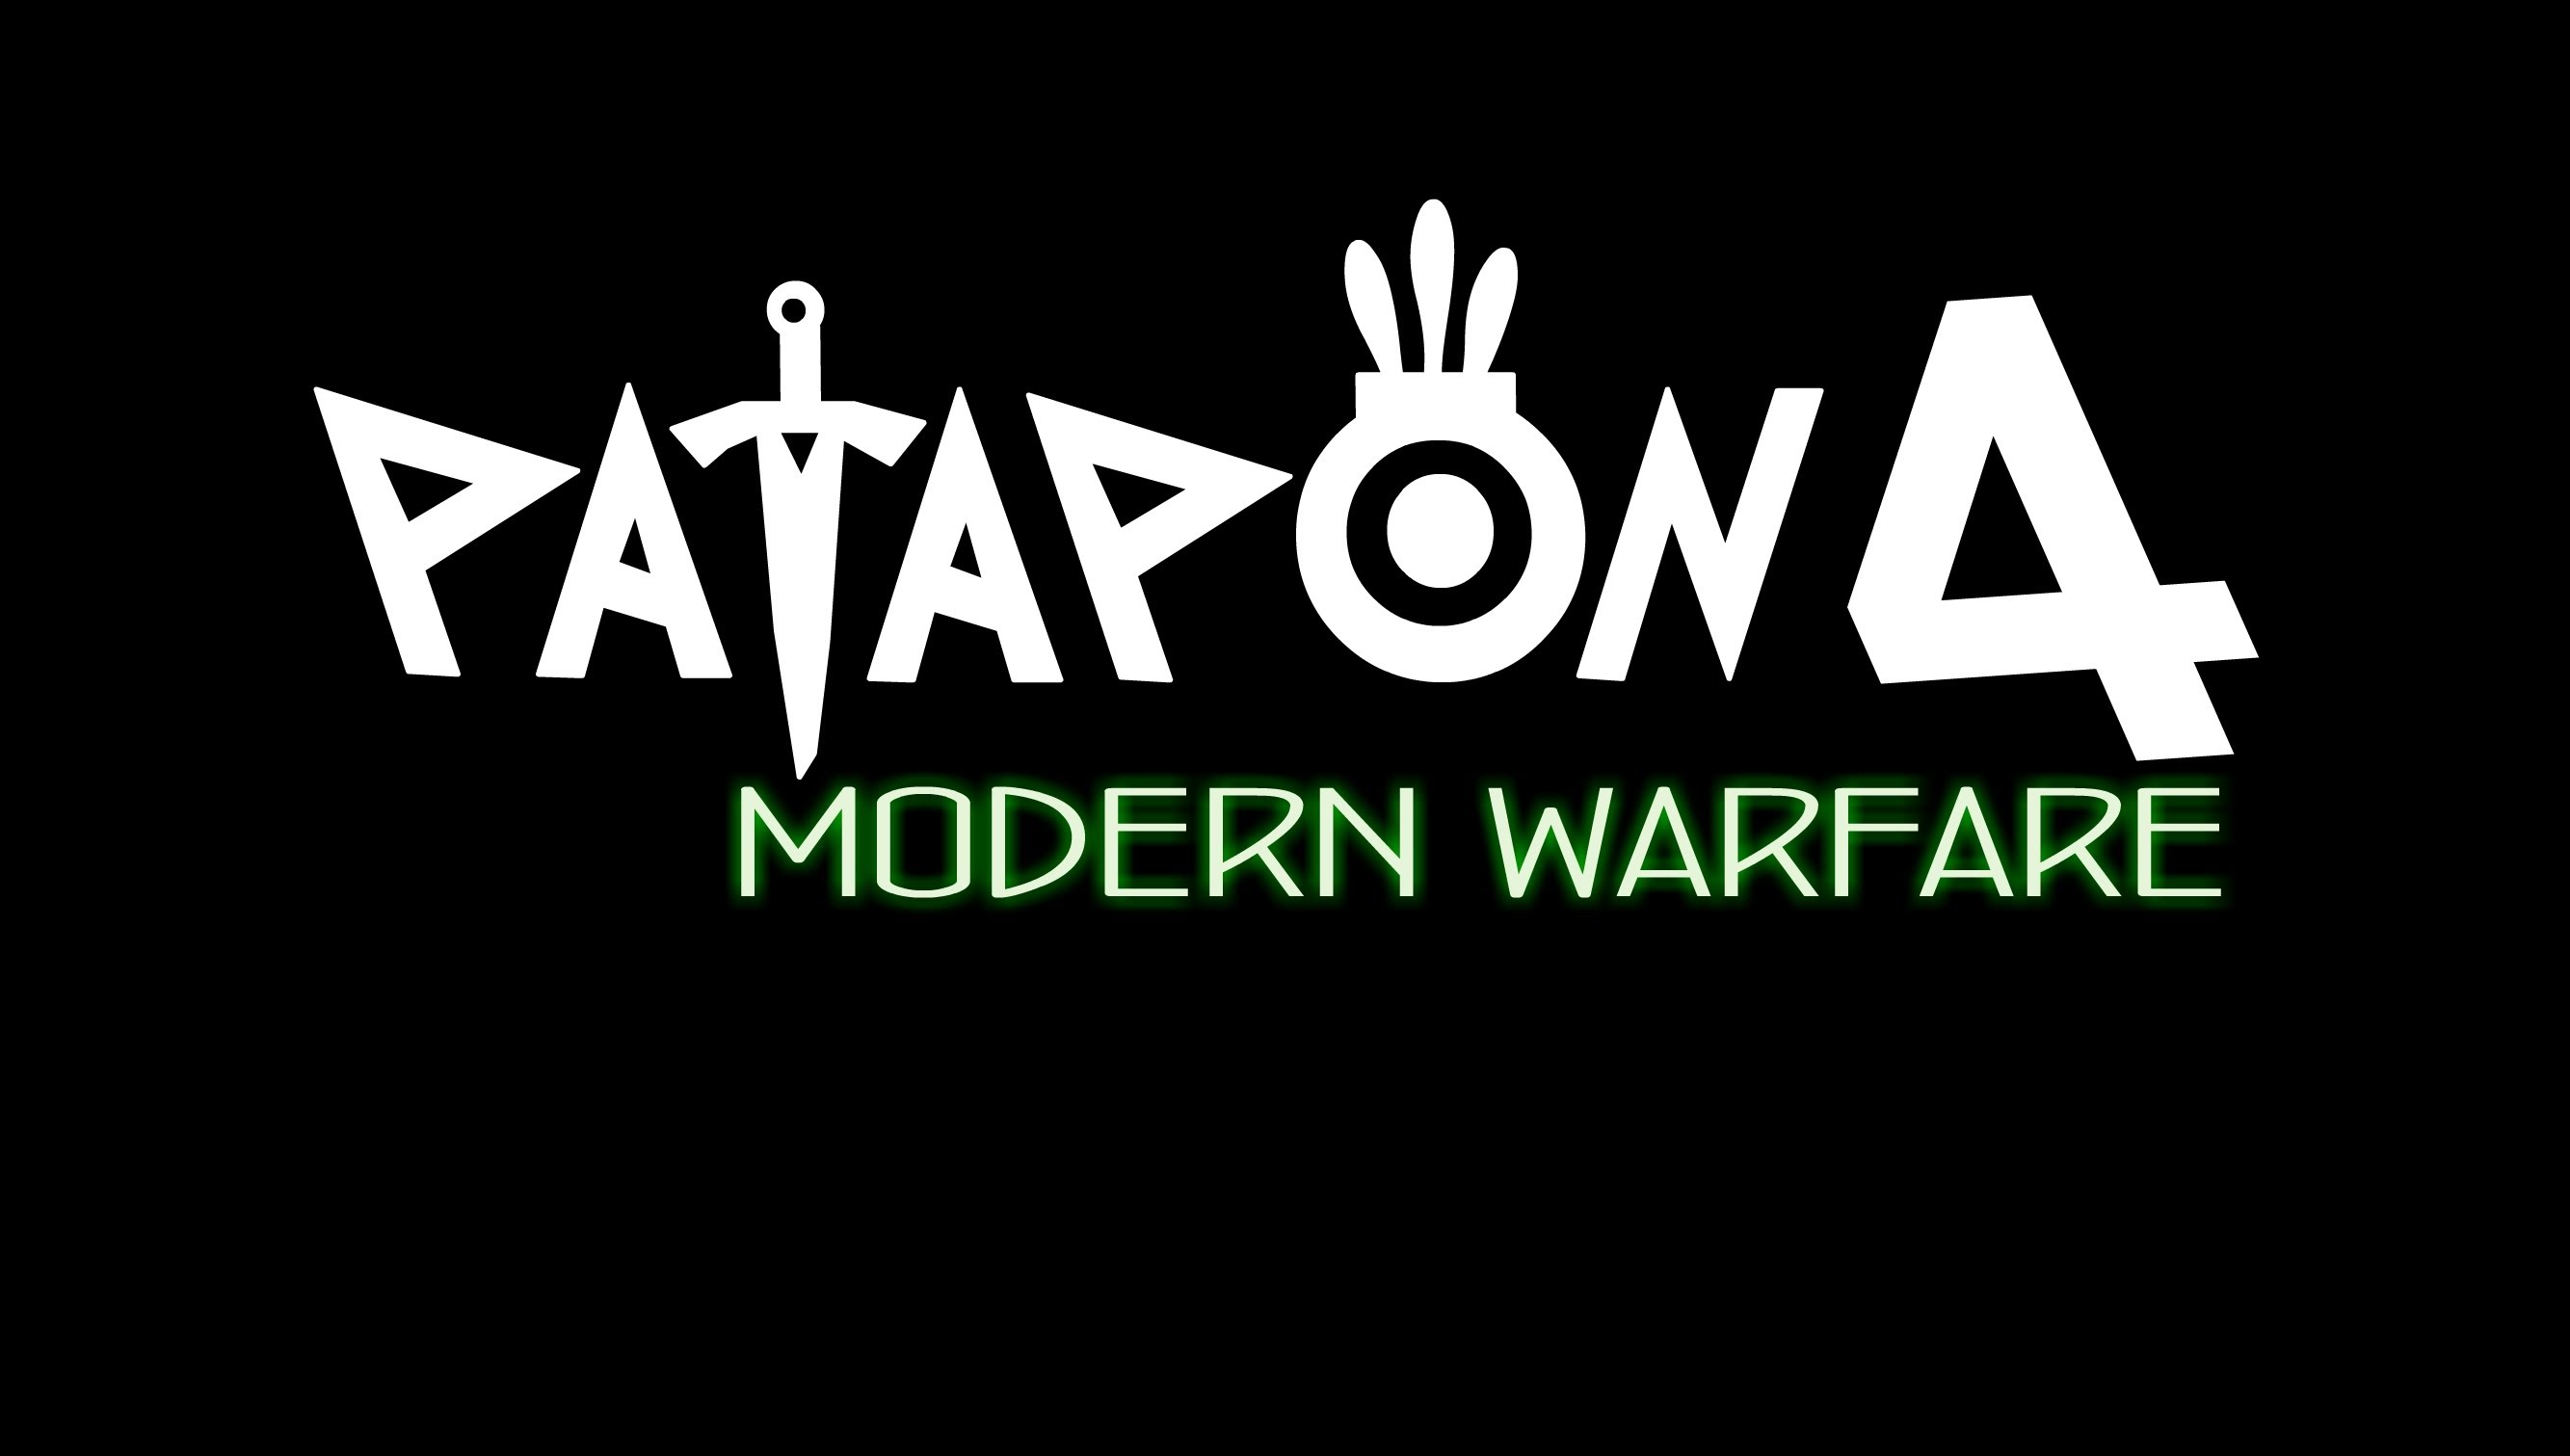 HQ Patapon Wallpapers | File 128.28Kb